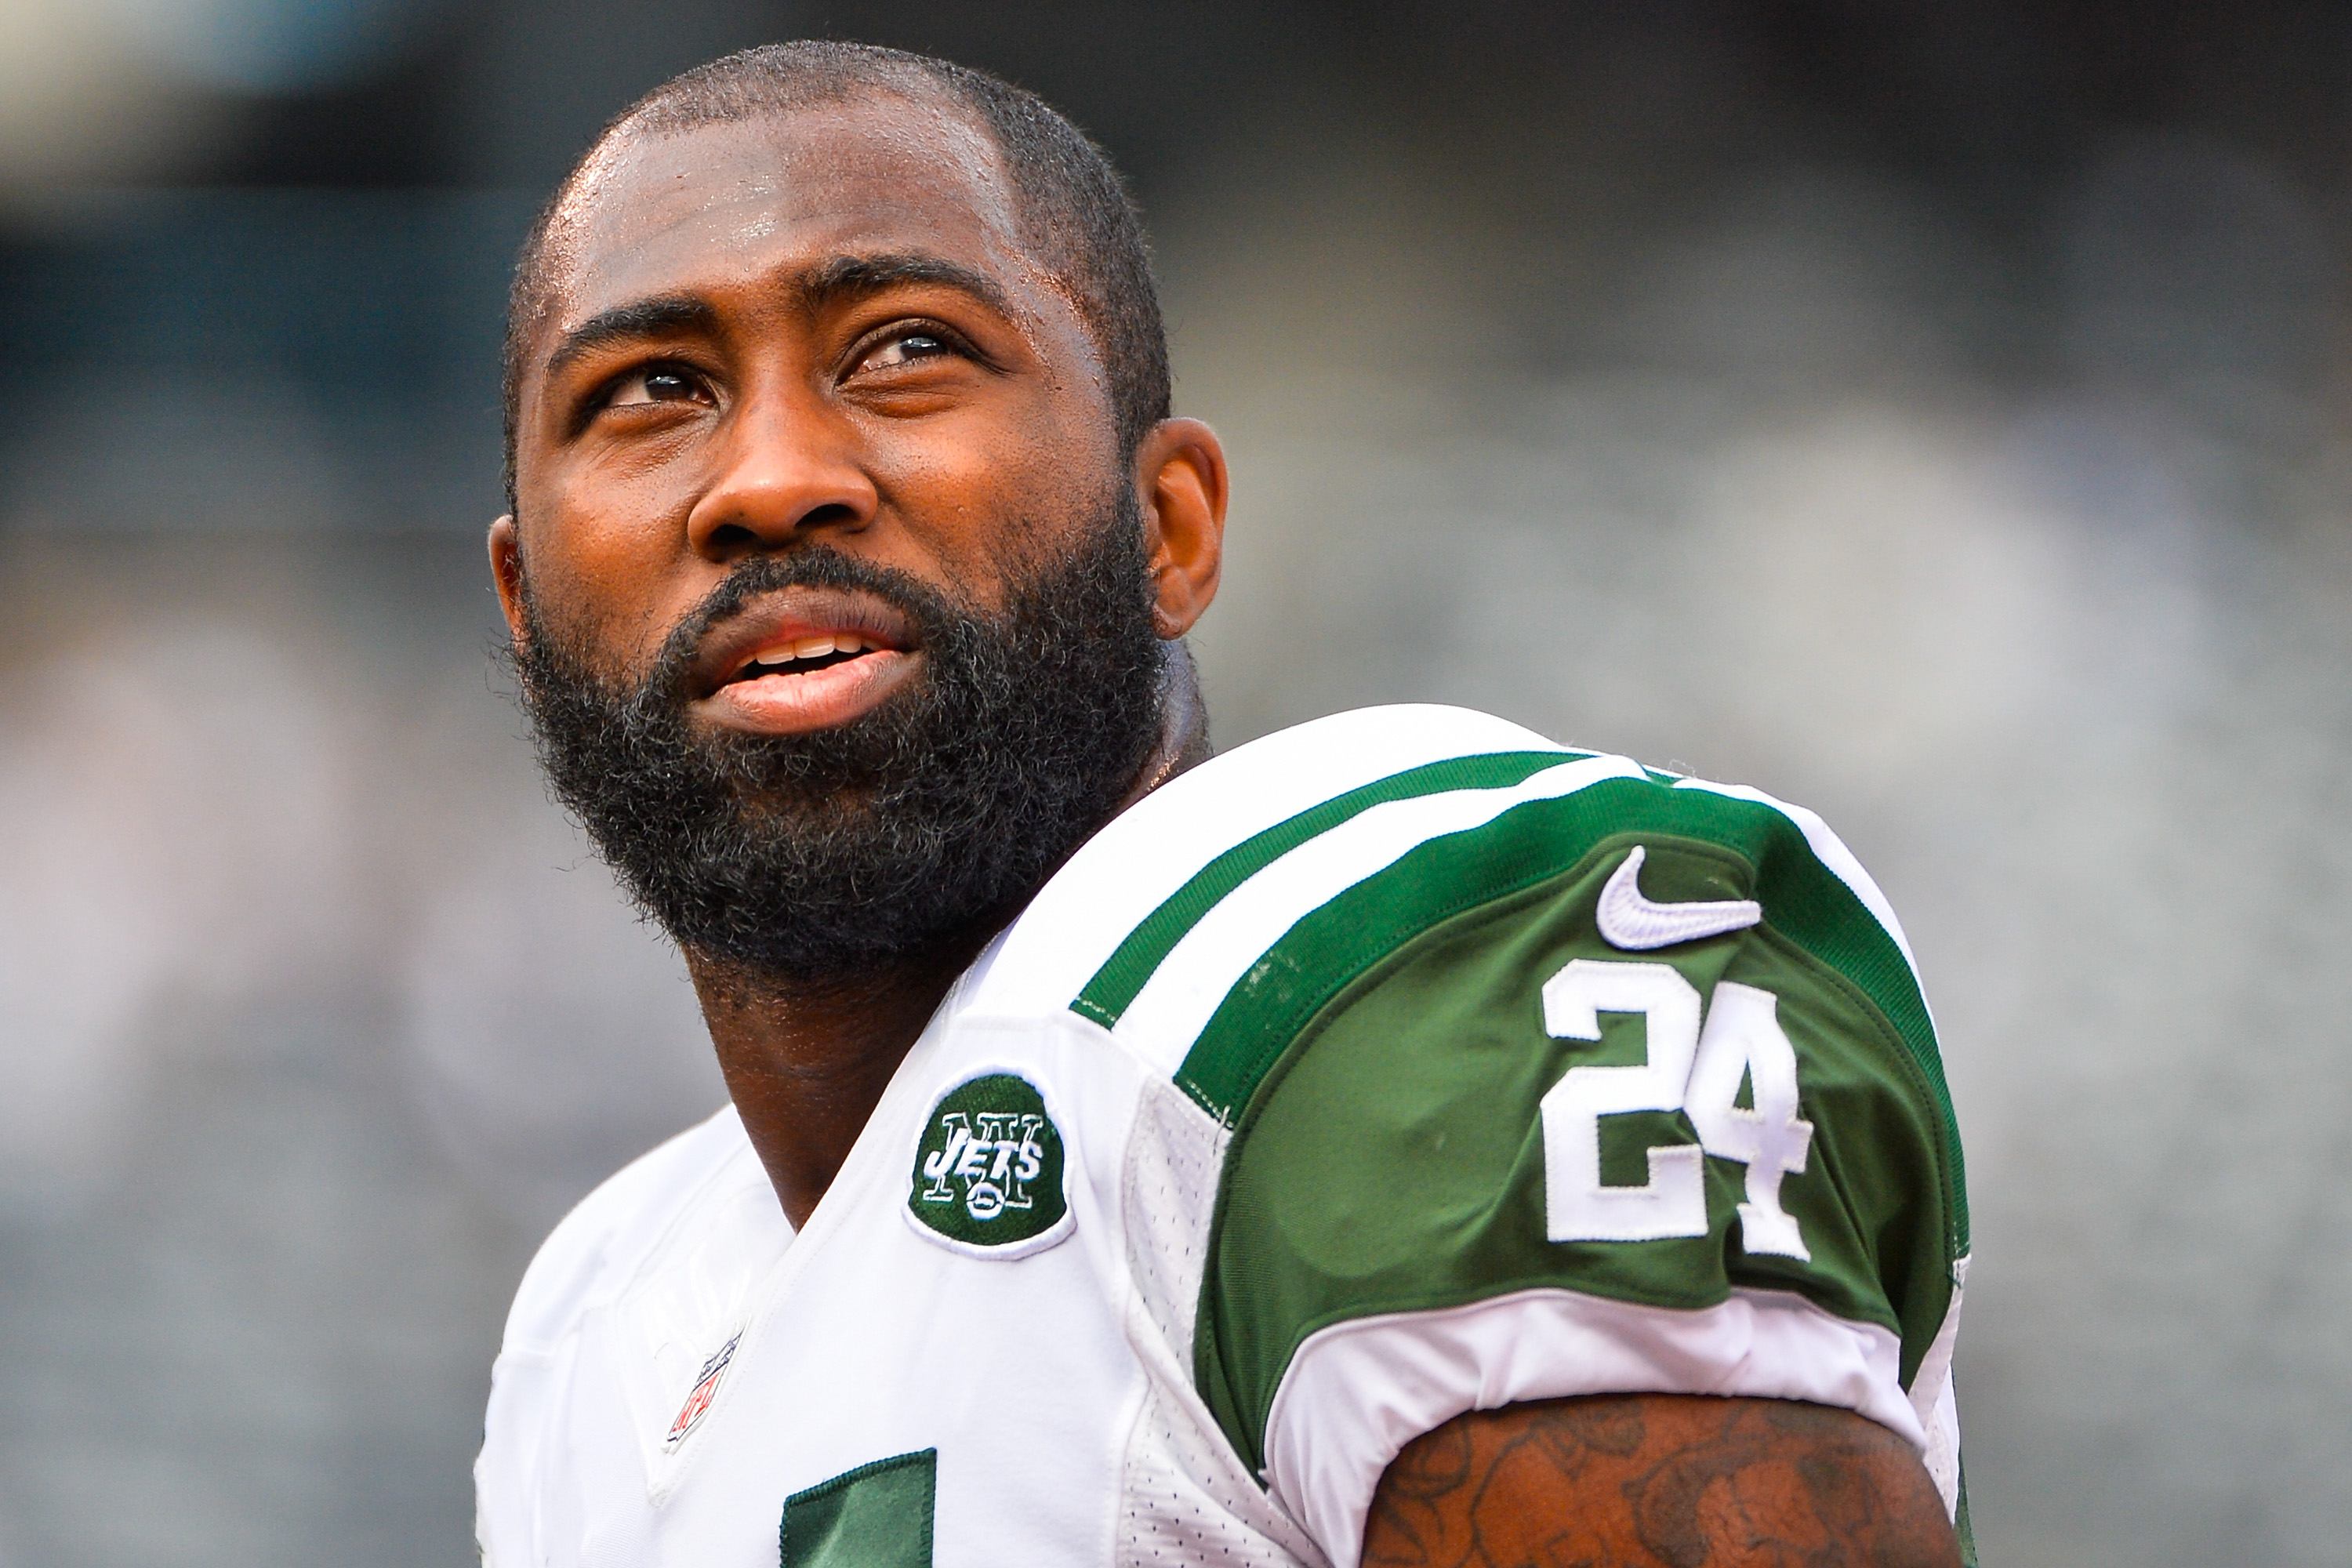 Darrelle Revis #24 of the New York Jets looks on before a game.